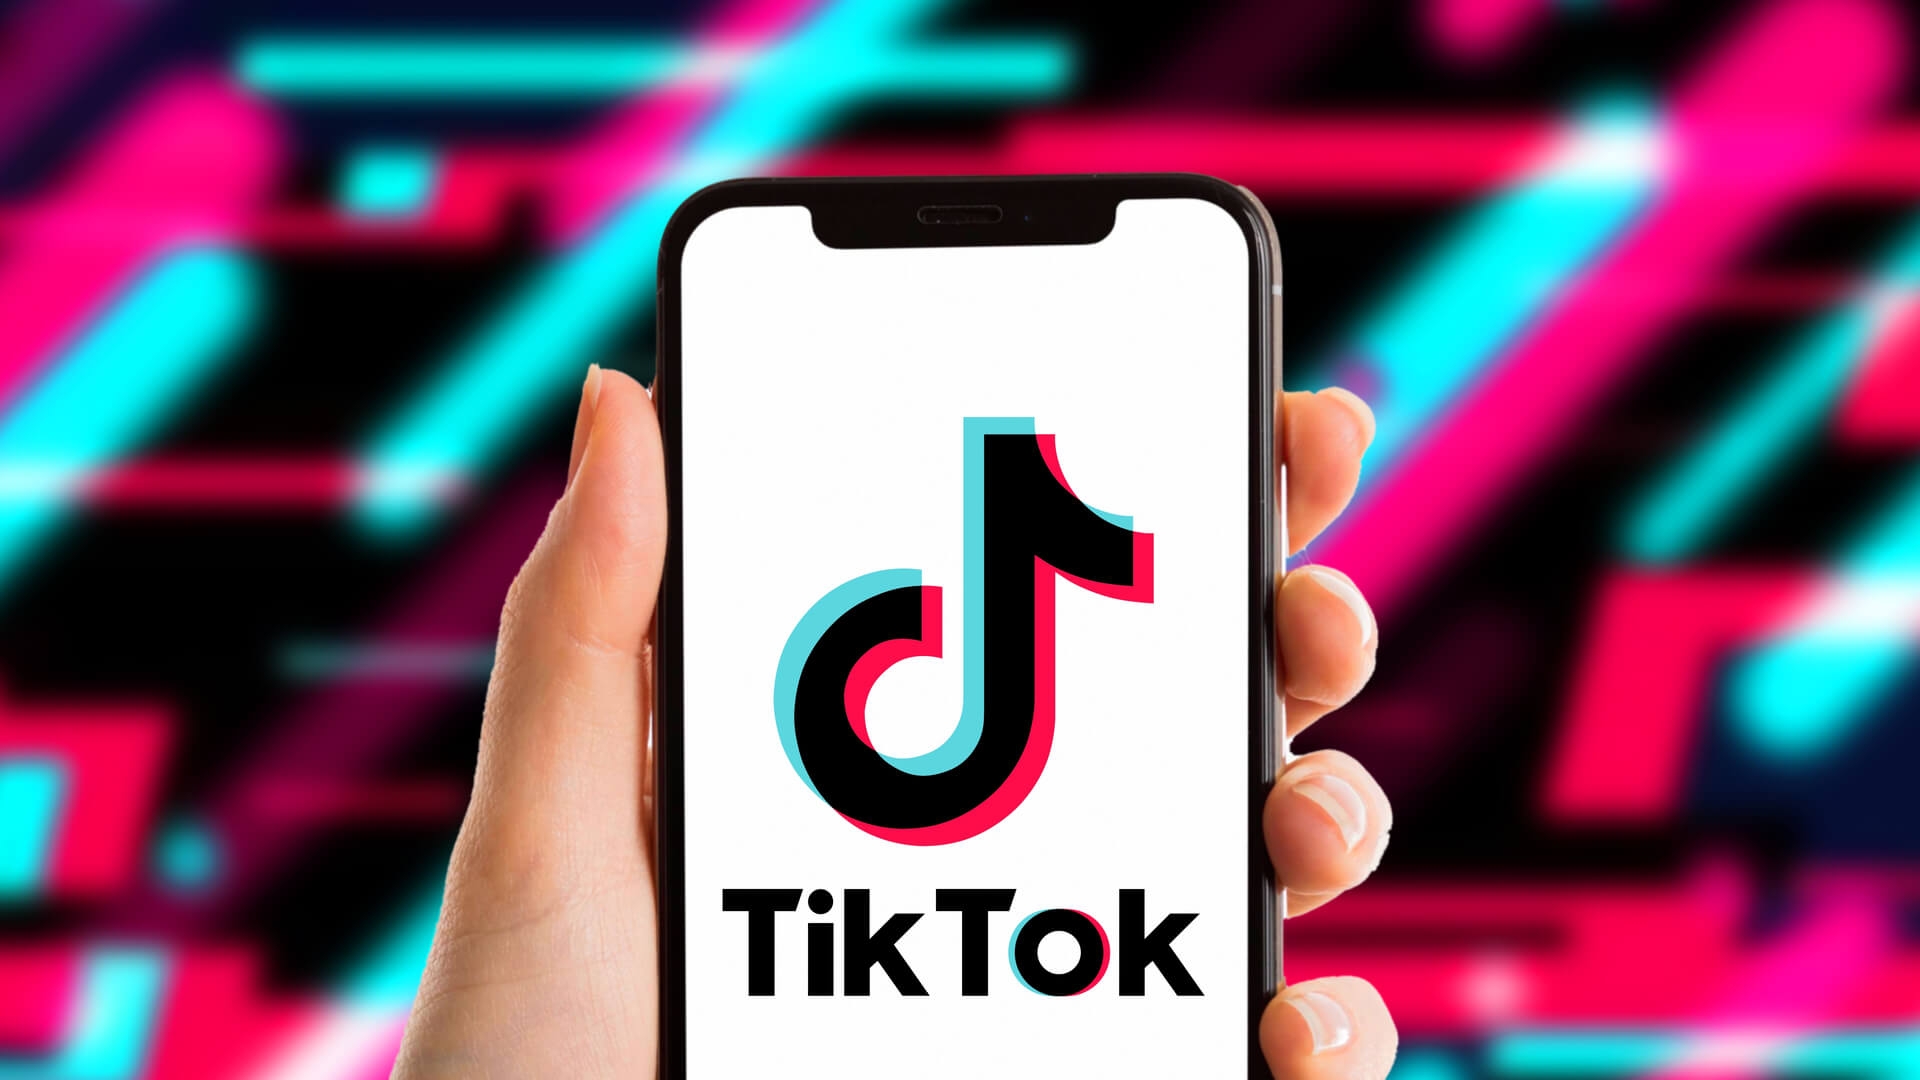 In this article, we are going to be going over how to filter comments on TikTok 2022, so you can rest easy while hateful comments are filtered automatically.